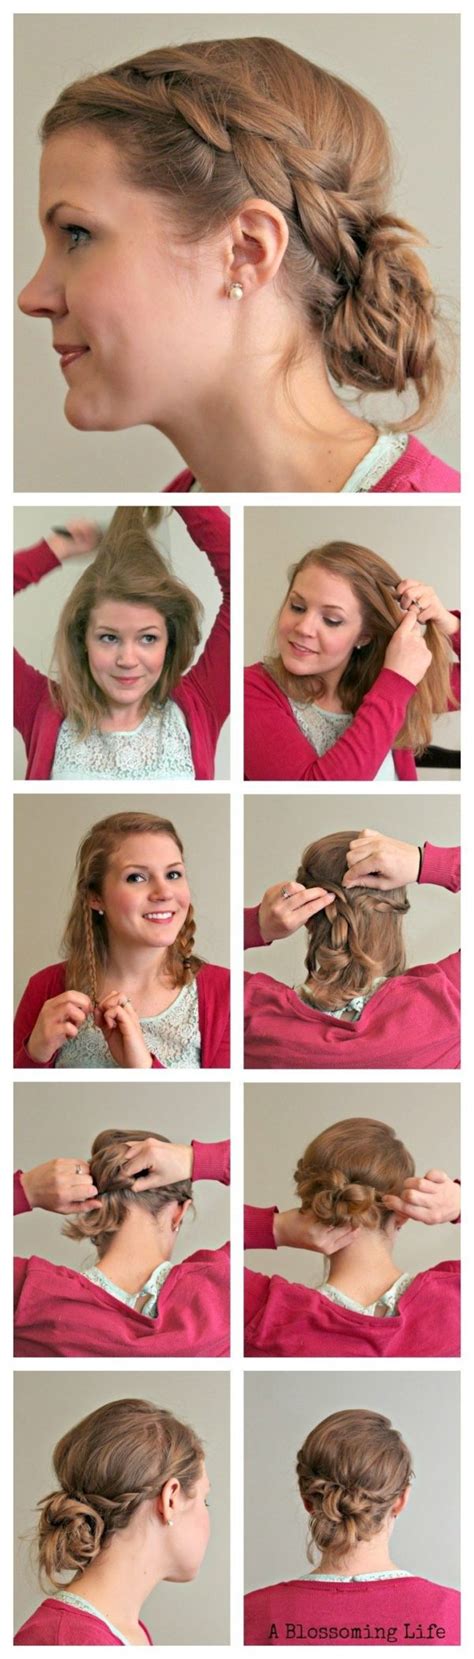 Elegant Hairstyle Tutorials Which Will Amaze You All For Fashion Design